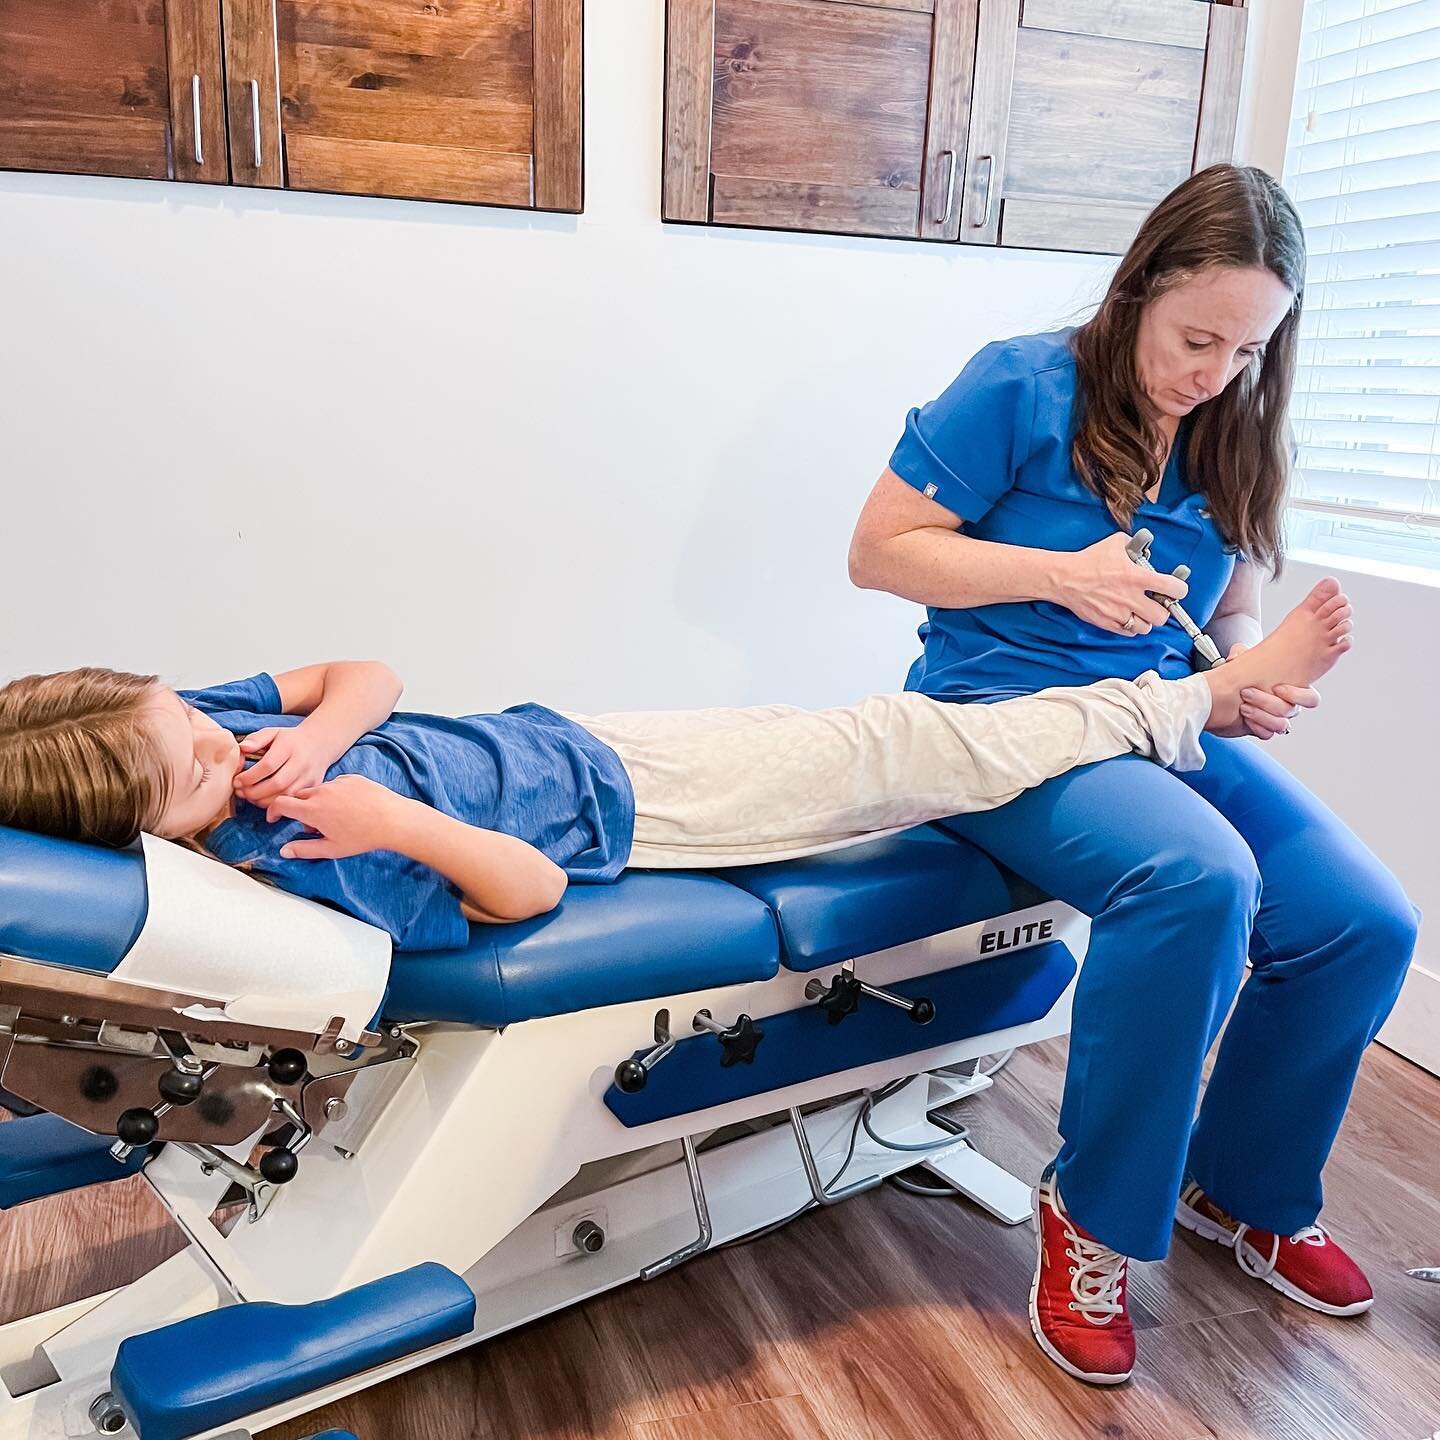 Chiropractic care can help with #footpain! 👣 

With 26 bones in each foot, it&rsquo;s easy to see why most people will experience foot pain at some point in their lives. 

This 10 year old #athlete came in to see us as she had been dealing with foot